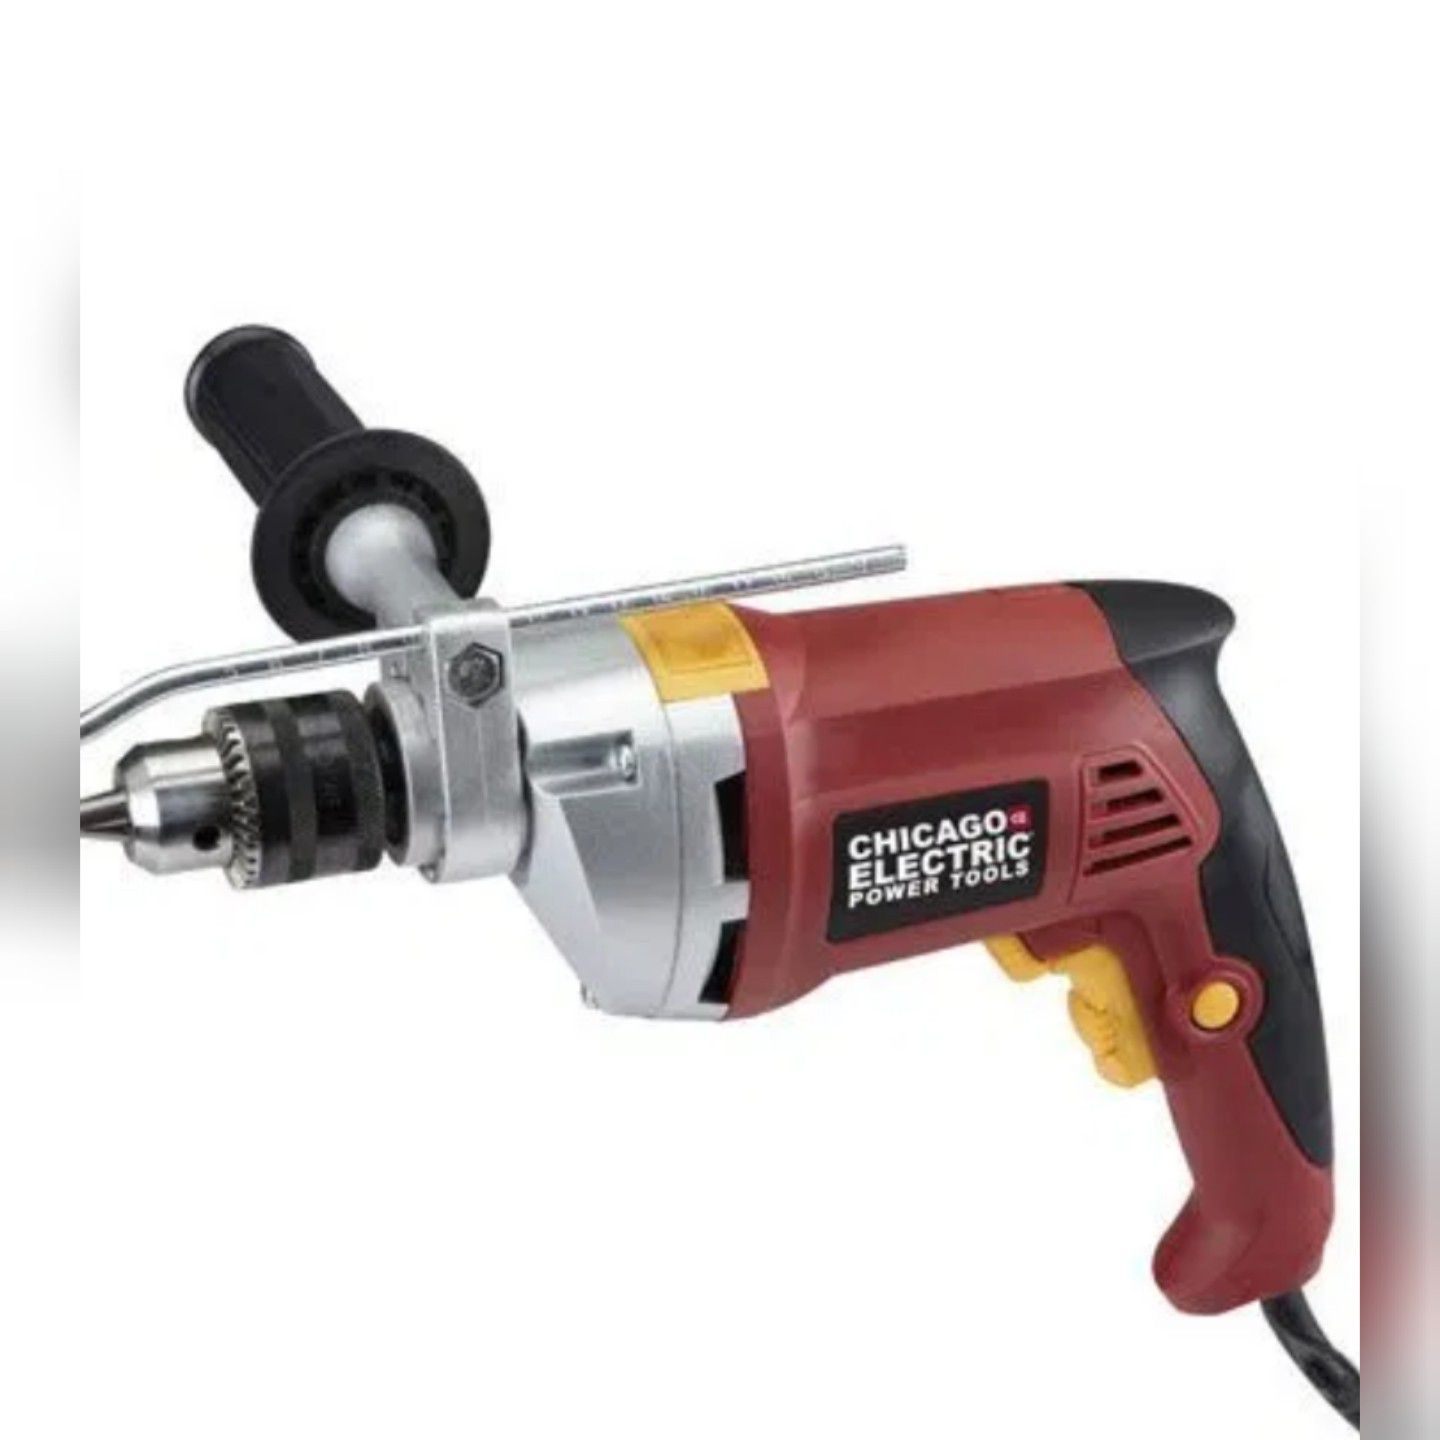 Chicago Electric 1/2in heavy duty hammer drill reversible variable speed.